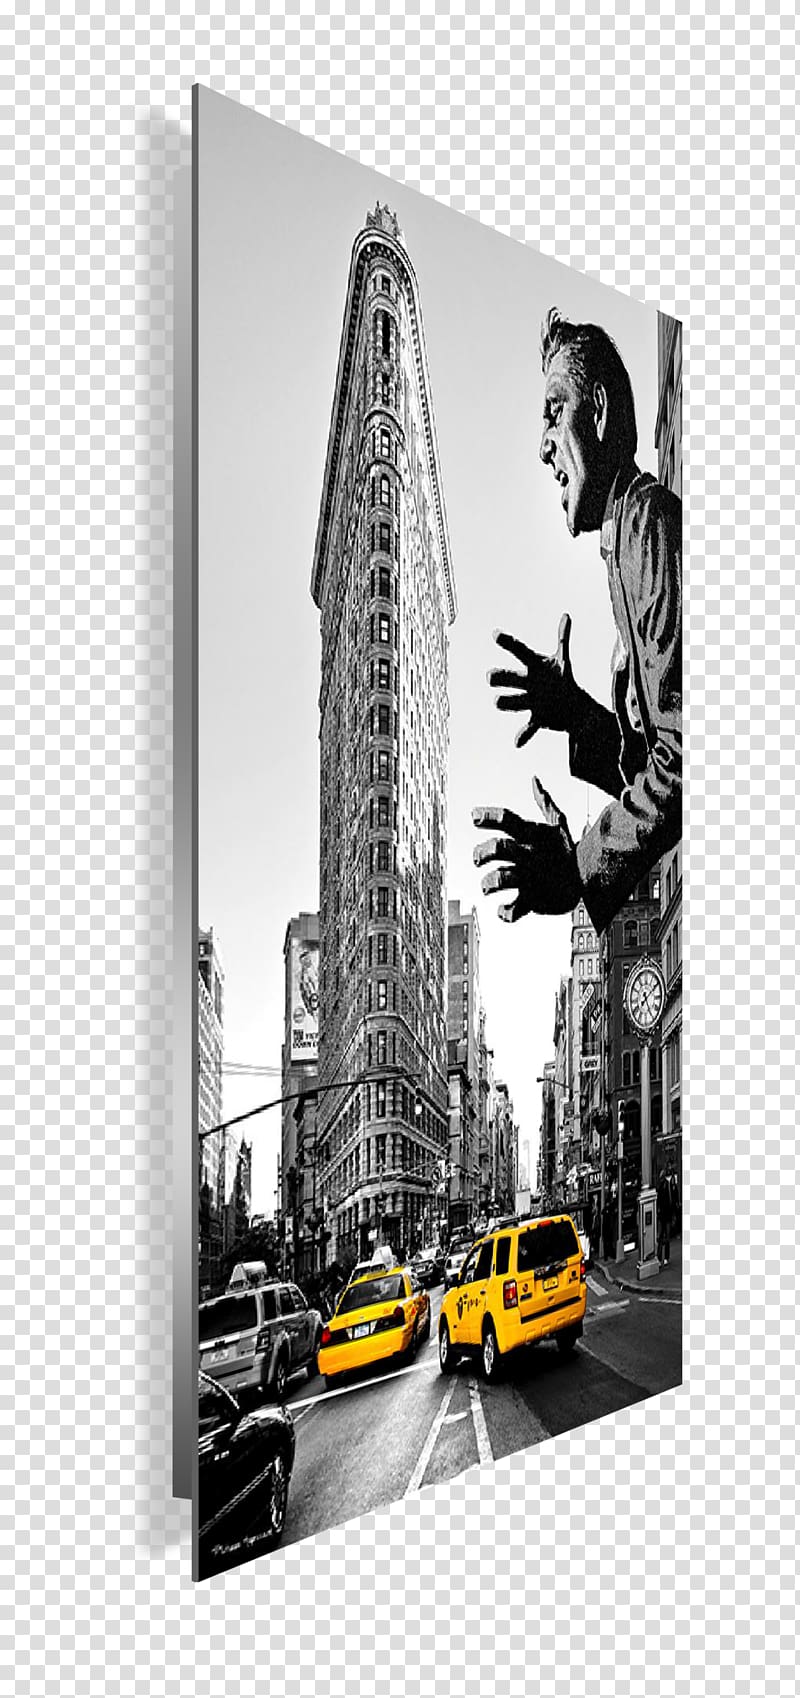 Flatiron Building Fifth Avenue Taxi Yellow cab, taxi transparent background PNG clipart